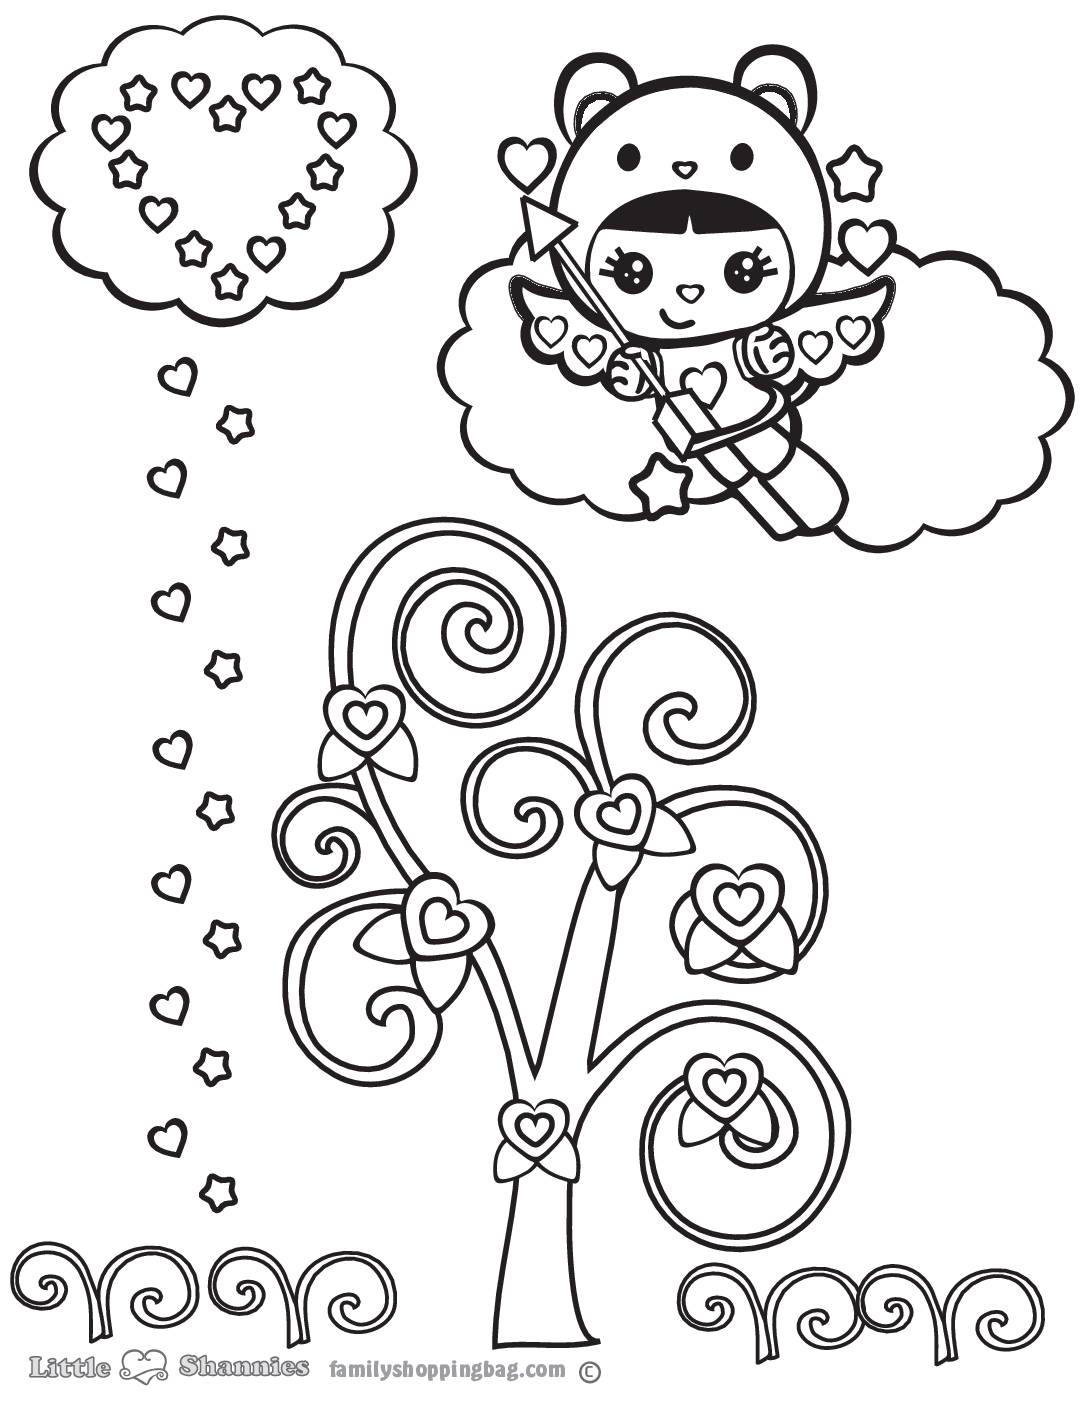 Coloring Page 5 Shannies